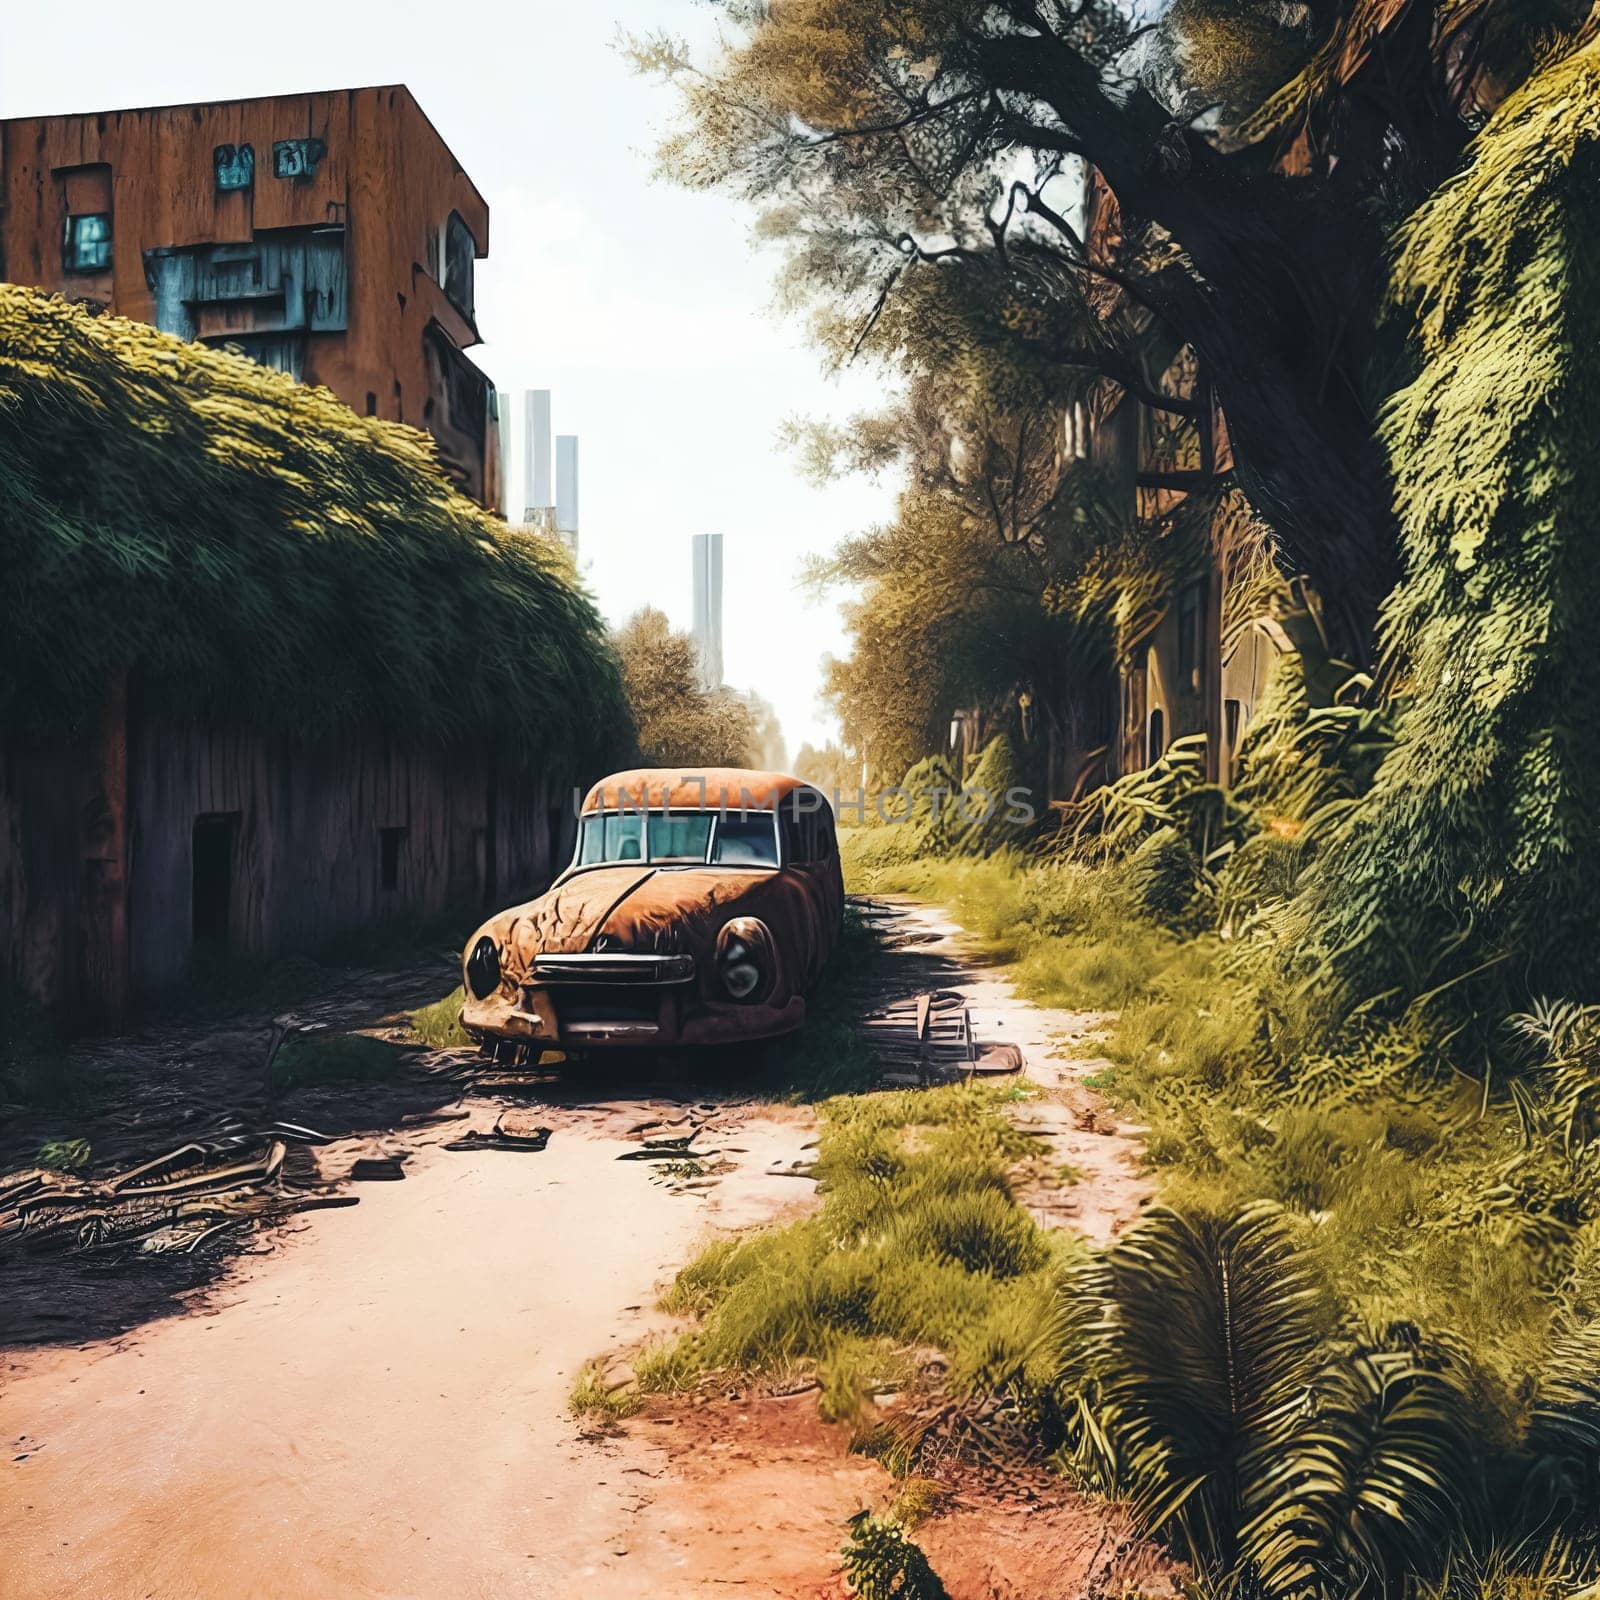 Abandoned cityscape, Deserted cityscape overgrown with vegetation, showcasing dilapidated skyscrapers, rusted cars, and nature reclaiming the urban environment.